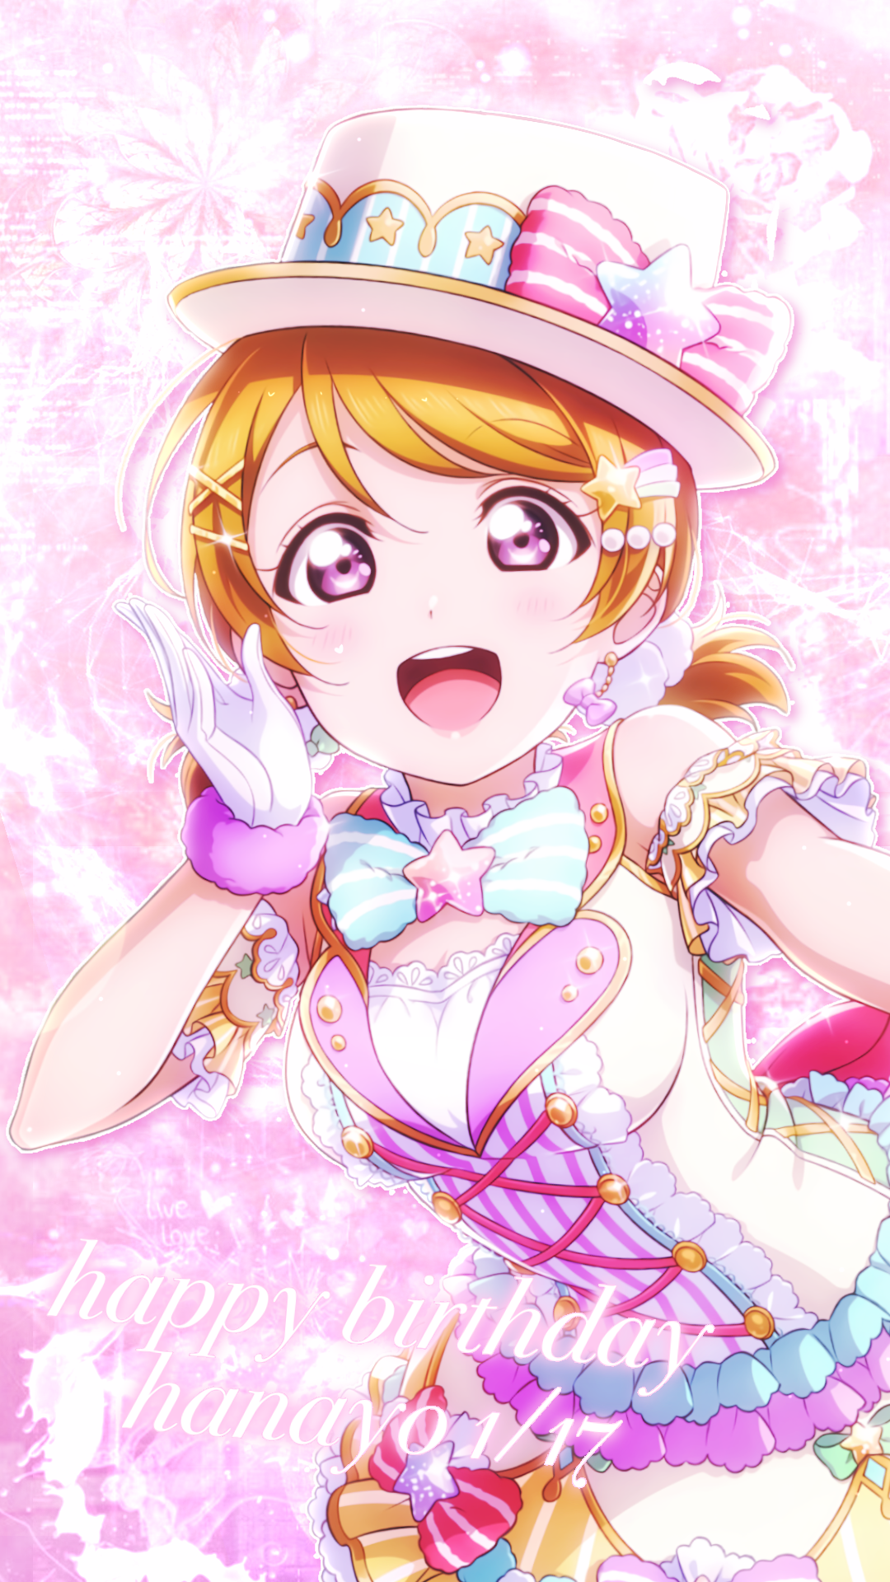 i wanted to make a wallpaper for panas birthday so that i could join hanayo’s birthday party on...